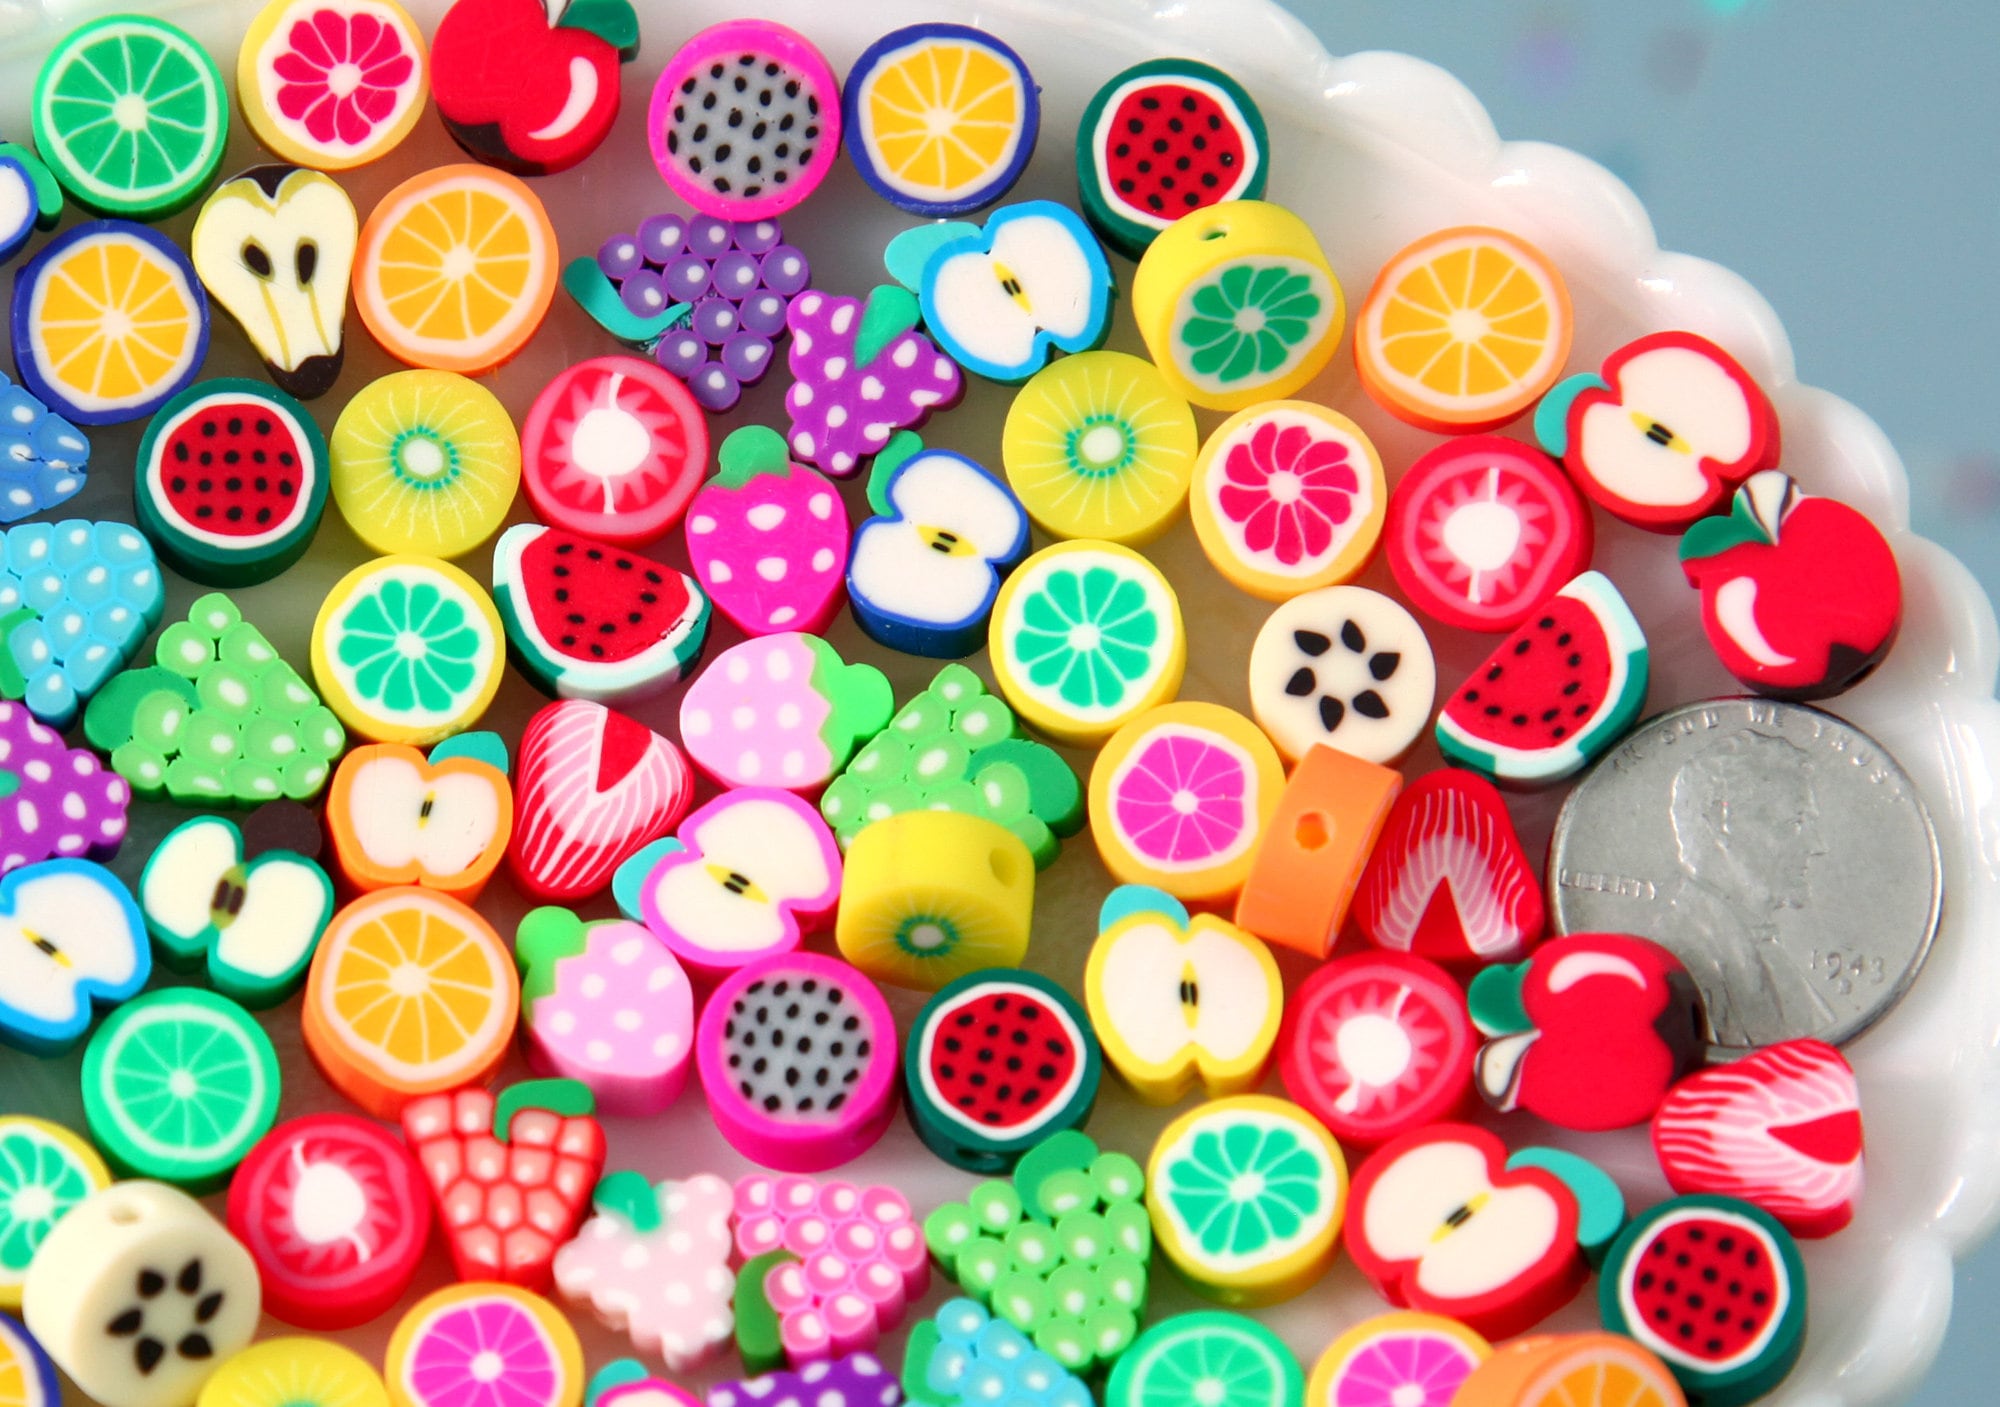 200 Pcs Colorful Fruit Beads 10mm Mixed Polymer Clay Beads for DIY Bracelet Necklace Earrings